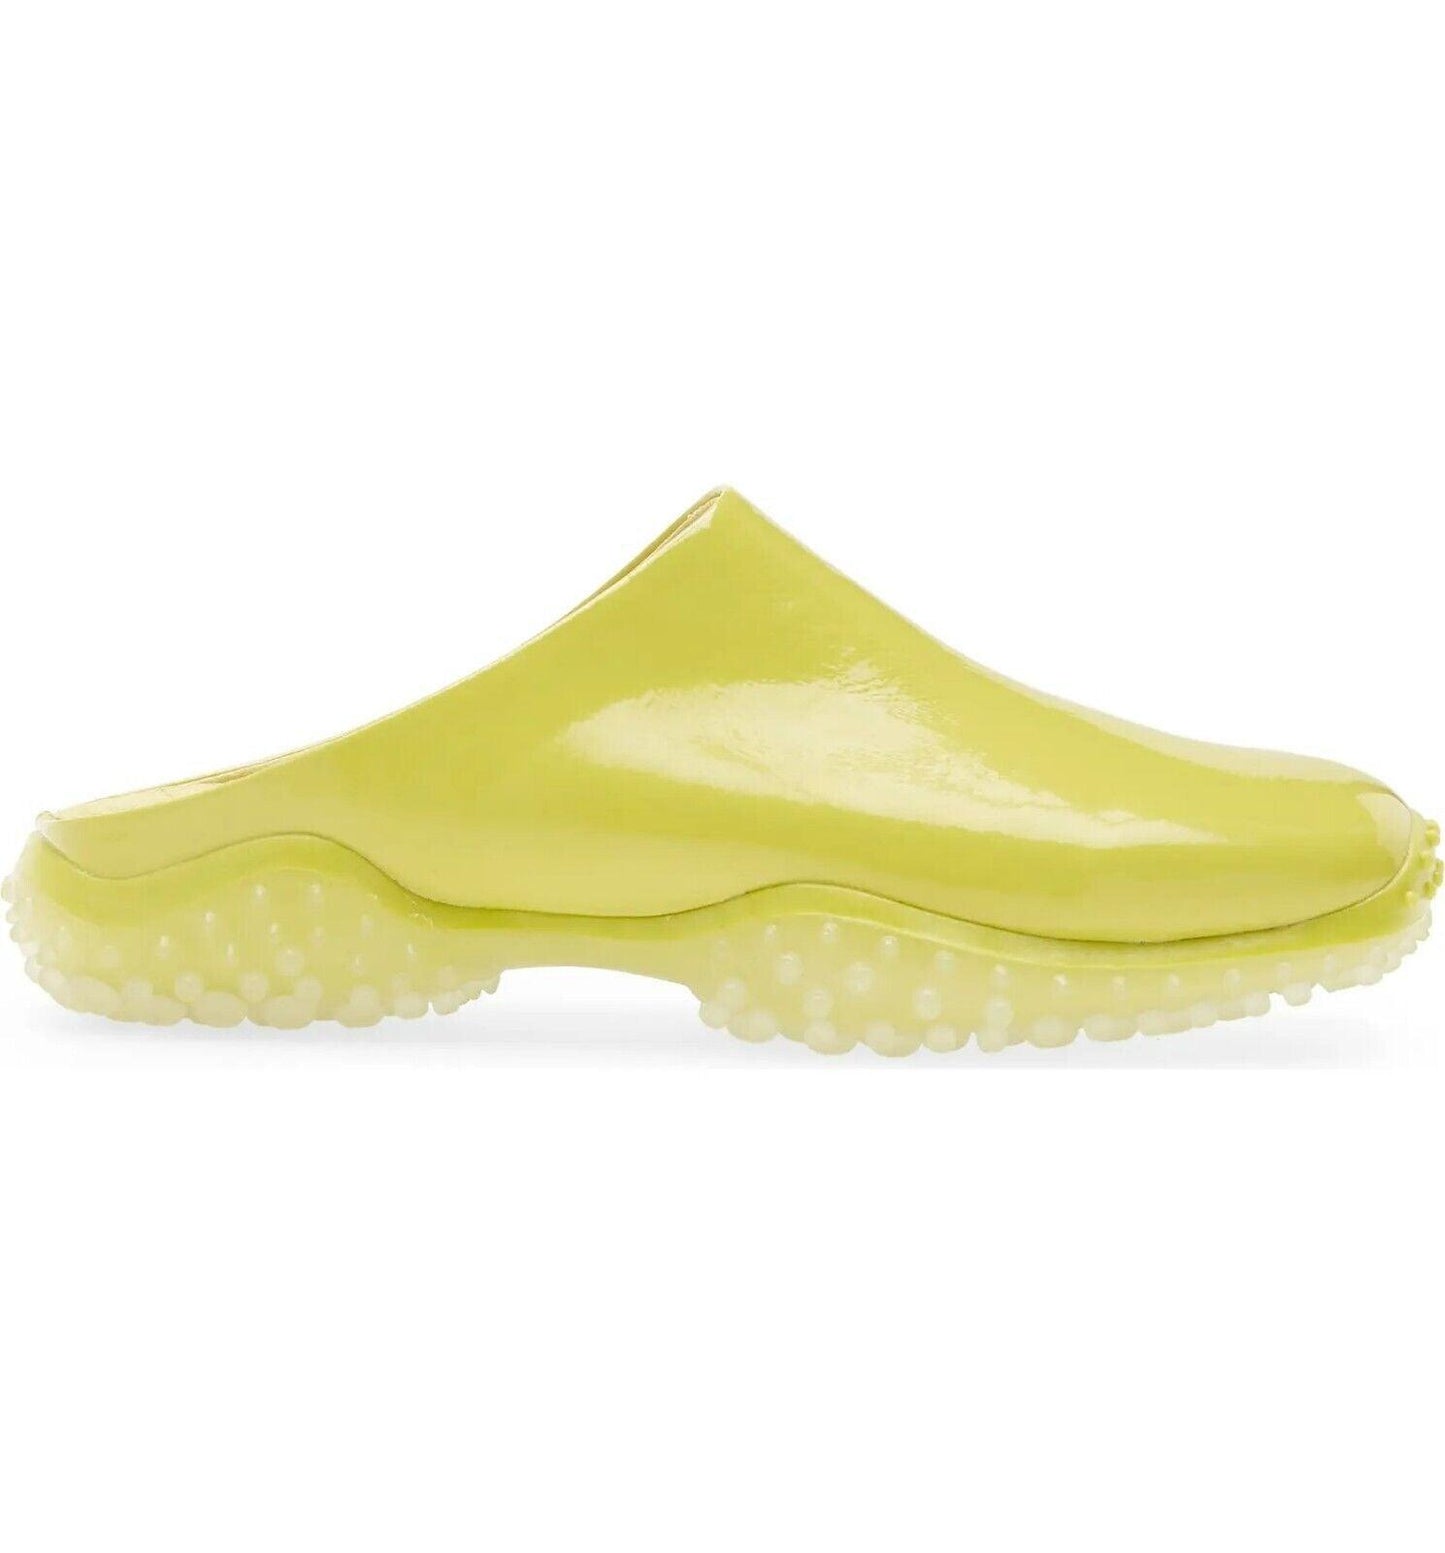 Jeffrey Campbell Lightyear Clog Mules Chartreuse Faux Patent Leather Size US 6.5 - SVNYFancy